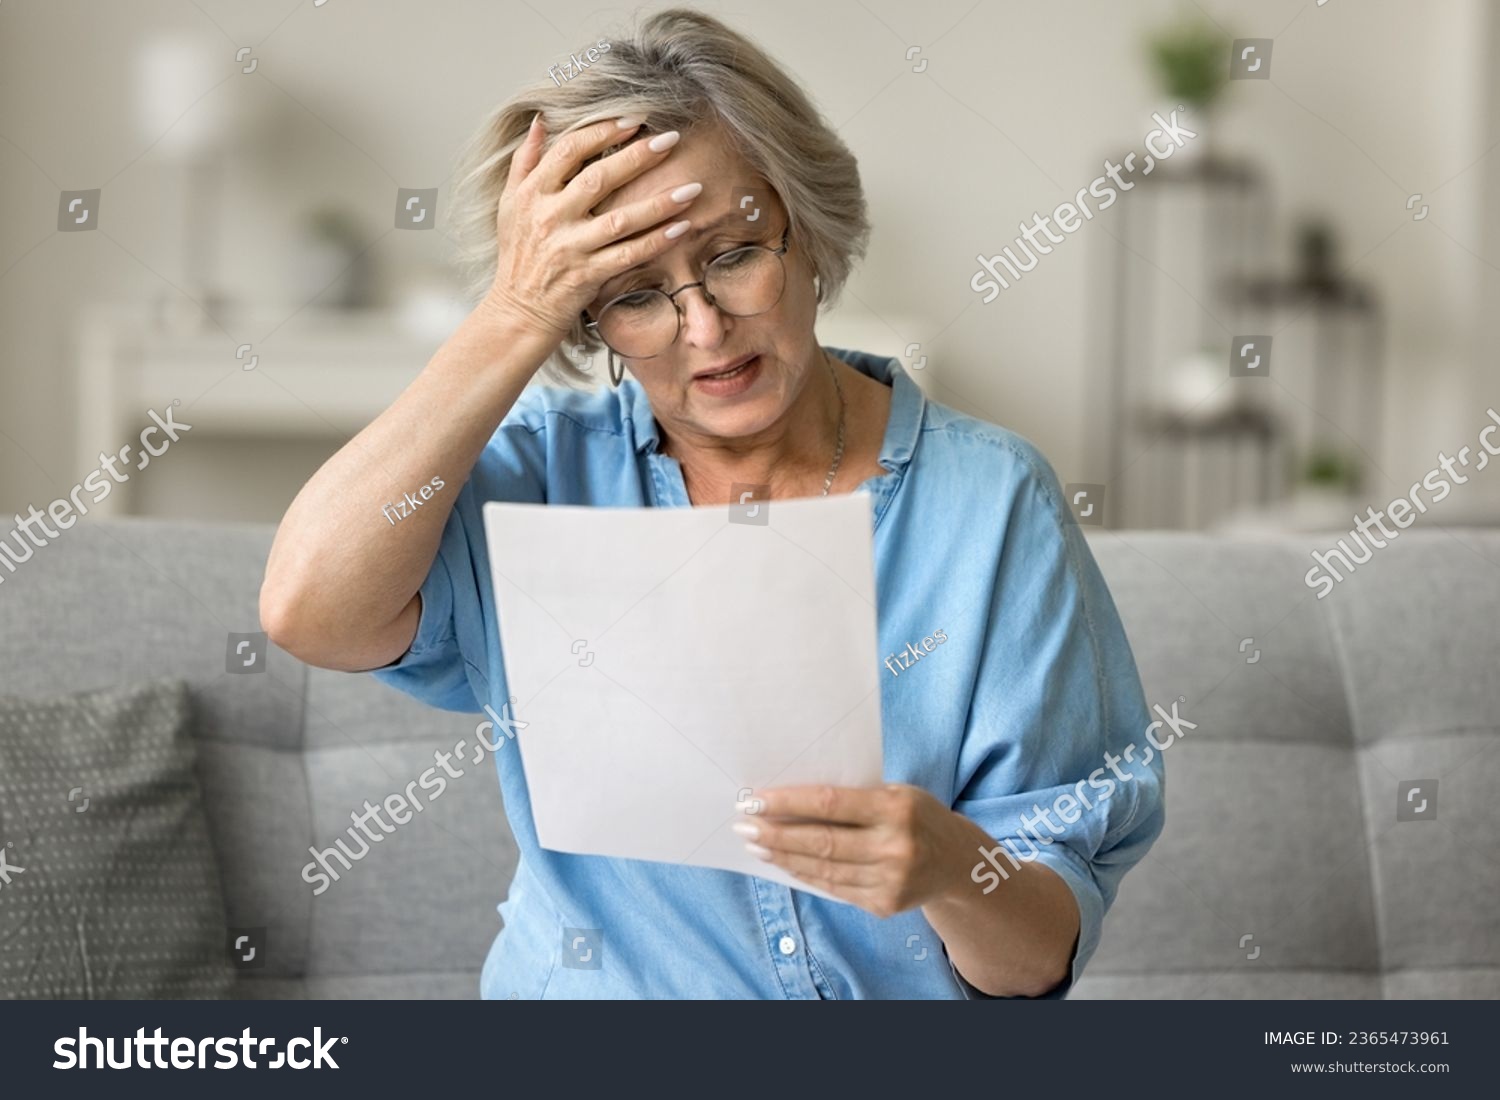 Stressed frustrated older woman getting bad news from paper letter, reading document at home, touching head in despair, panic attack, sitting on couch, receiving concerning medical result #2365473961